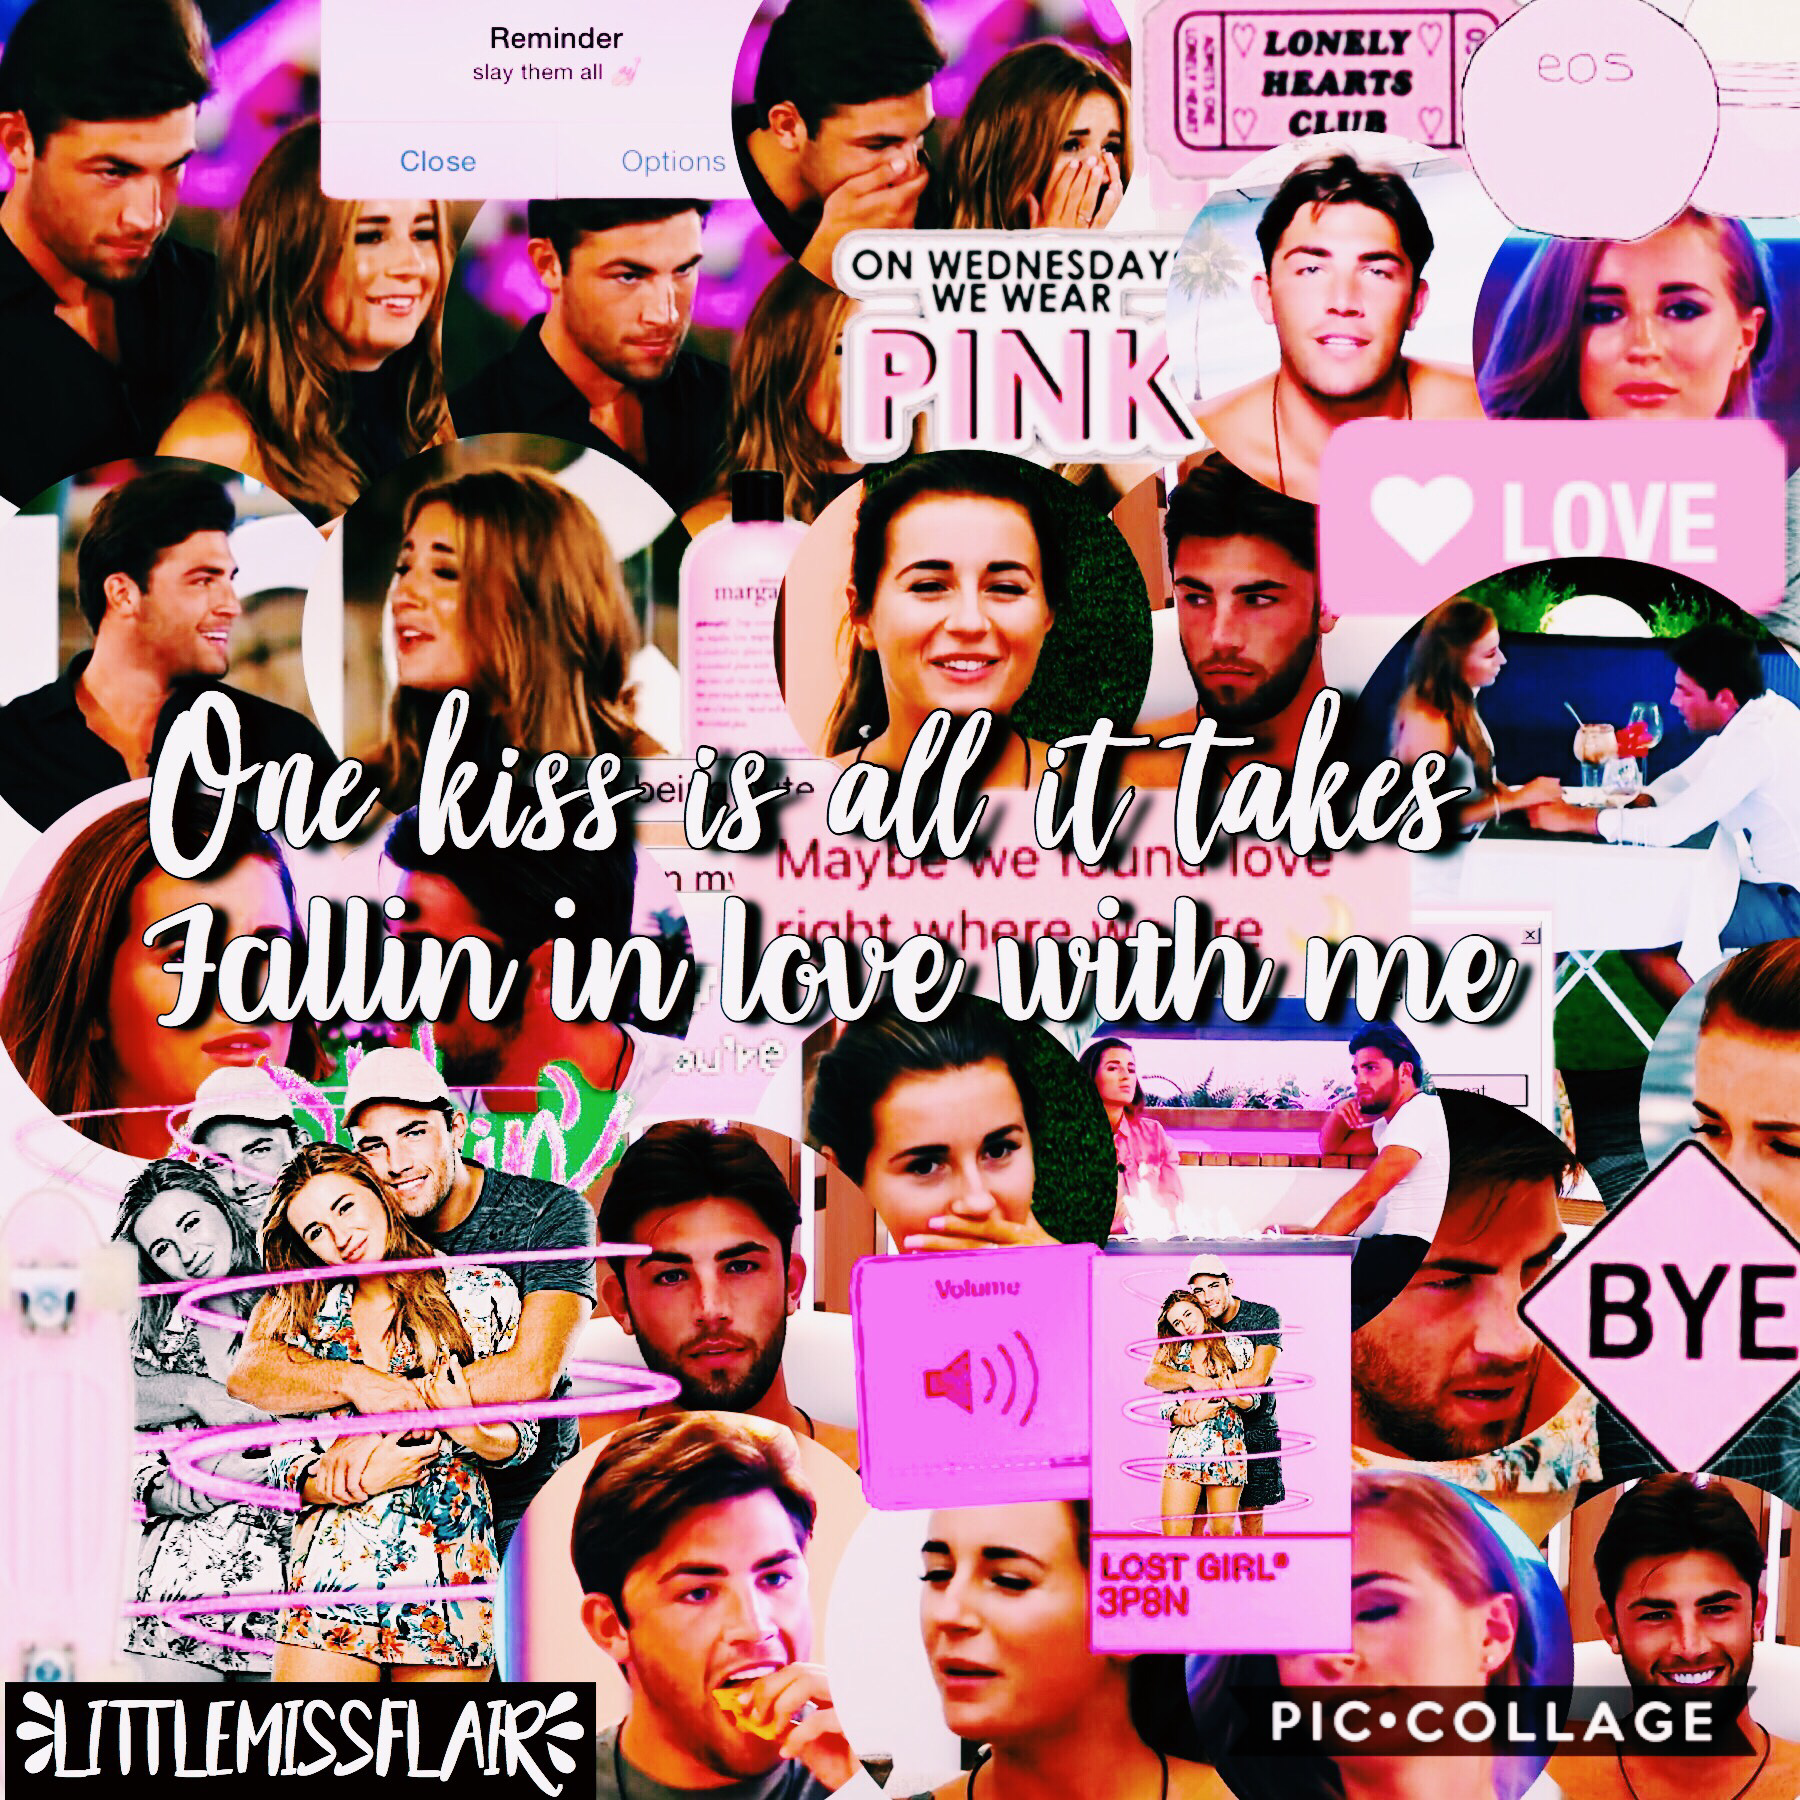 🌹 t a p 🌹

If you’re not English you won’t understand this. DANI AND JACK WINNING LOVE ISLAND WAS THE BEST THING TO EVER HAPPEN 🌴!
Q// X Factor or The Voice? 
A// X Factor 

🌹e n d 🌹